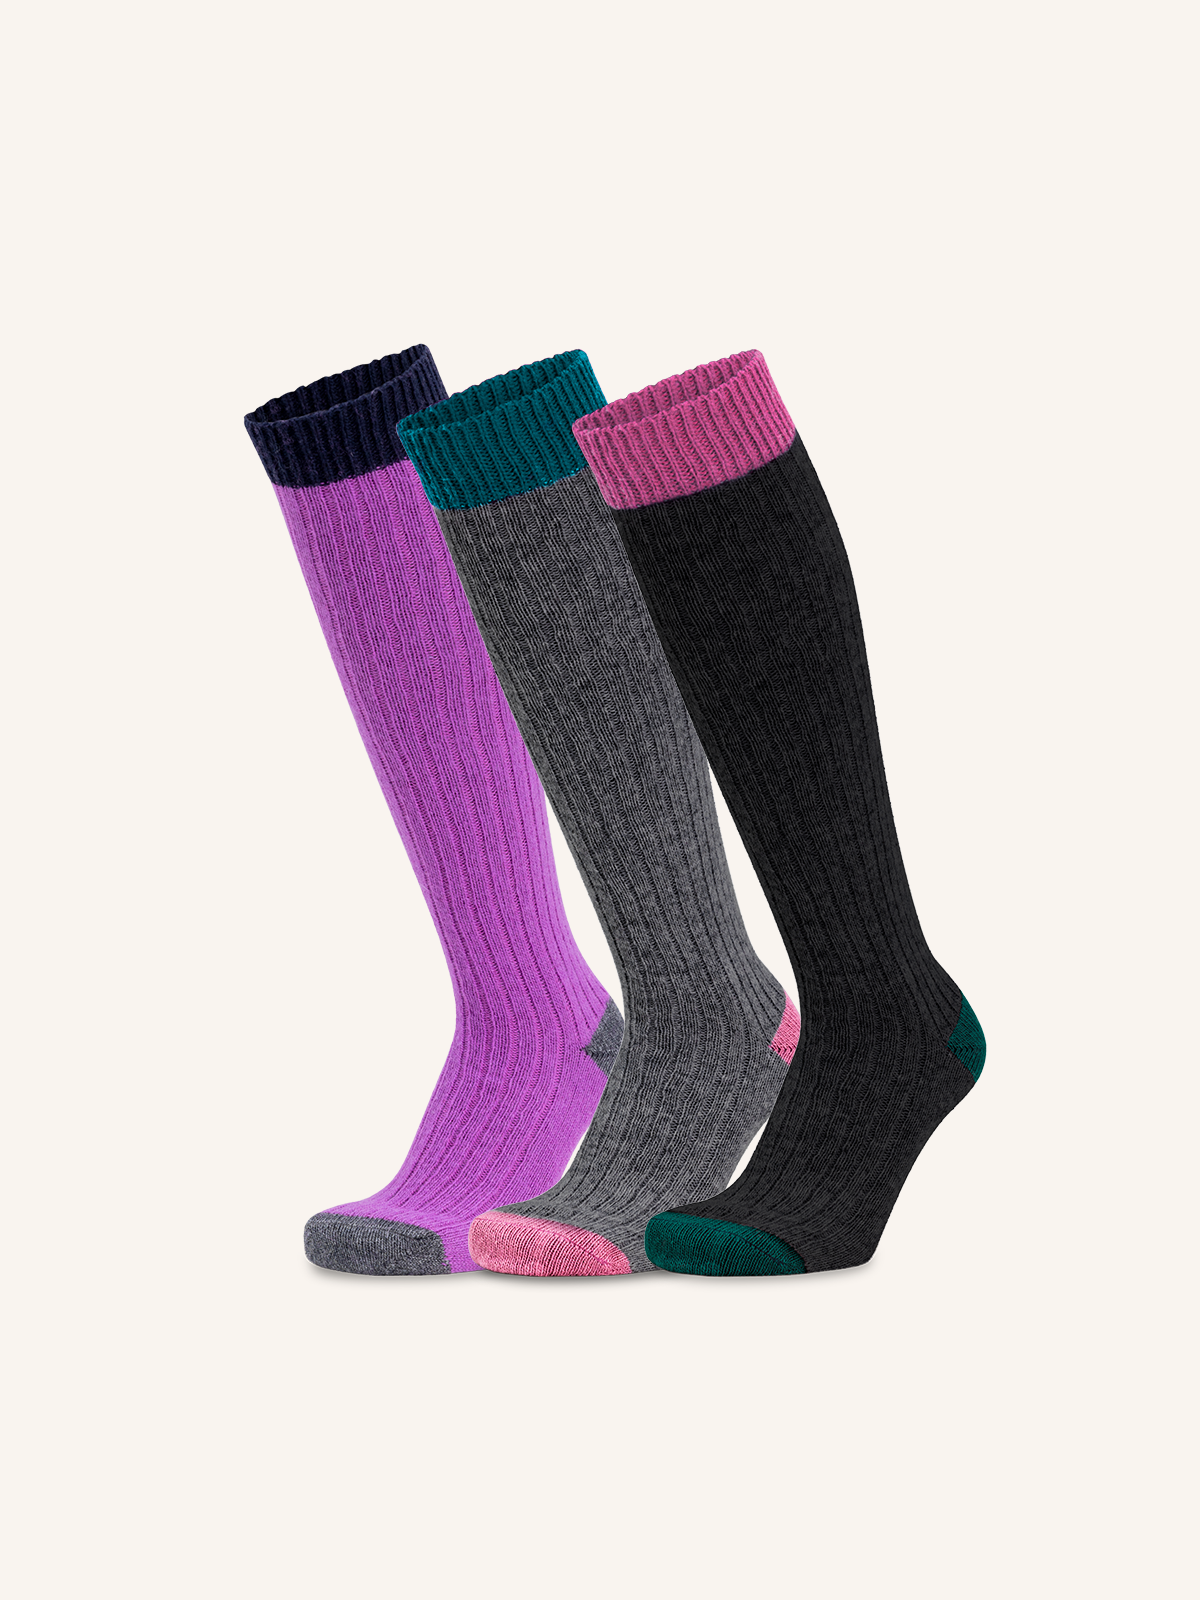 Long Ribbed Socks in Cashmere and Wool Blend for Women | Plain Color | Pack of 3 pairs | Cachelife DL